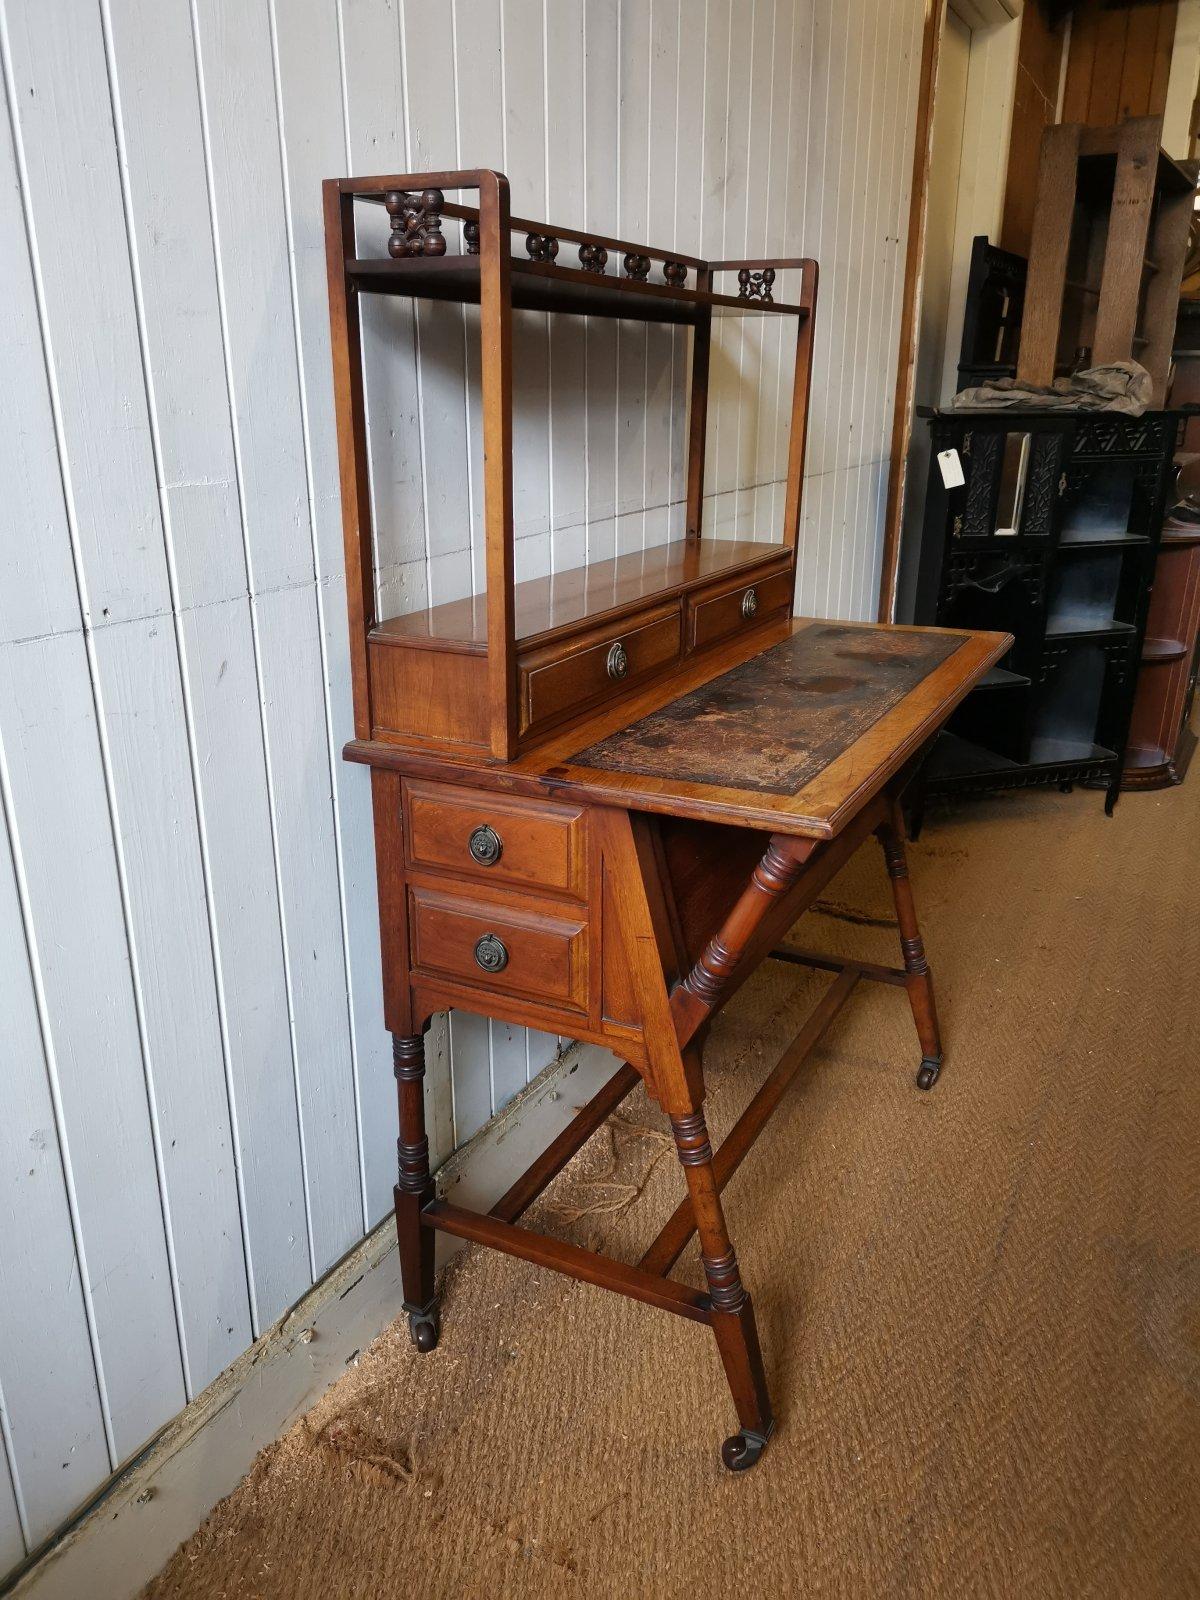 Liberty & Co.
A Moorish Walnut Desk with Mushrabia turnings to the upper shelf, just below to the turned uprights there are dowel holes which I have shown in the images, they are there to hold wooden rods so you can wrap fabric of your choice